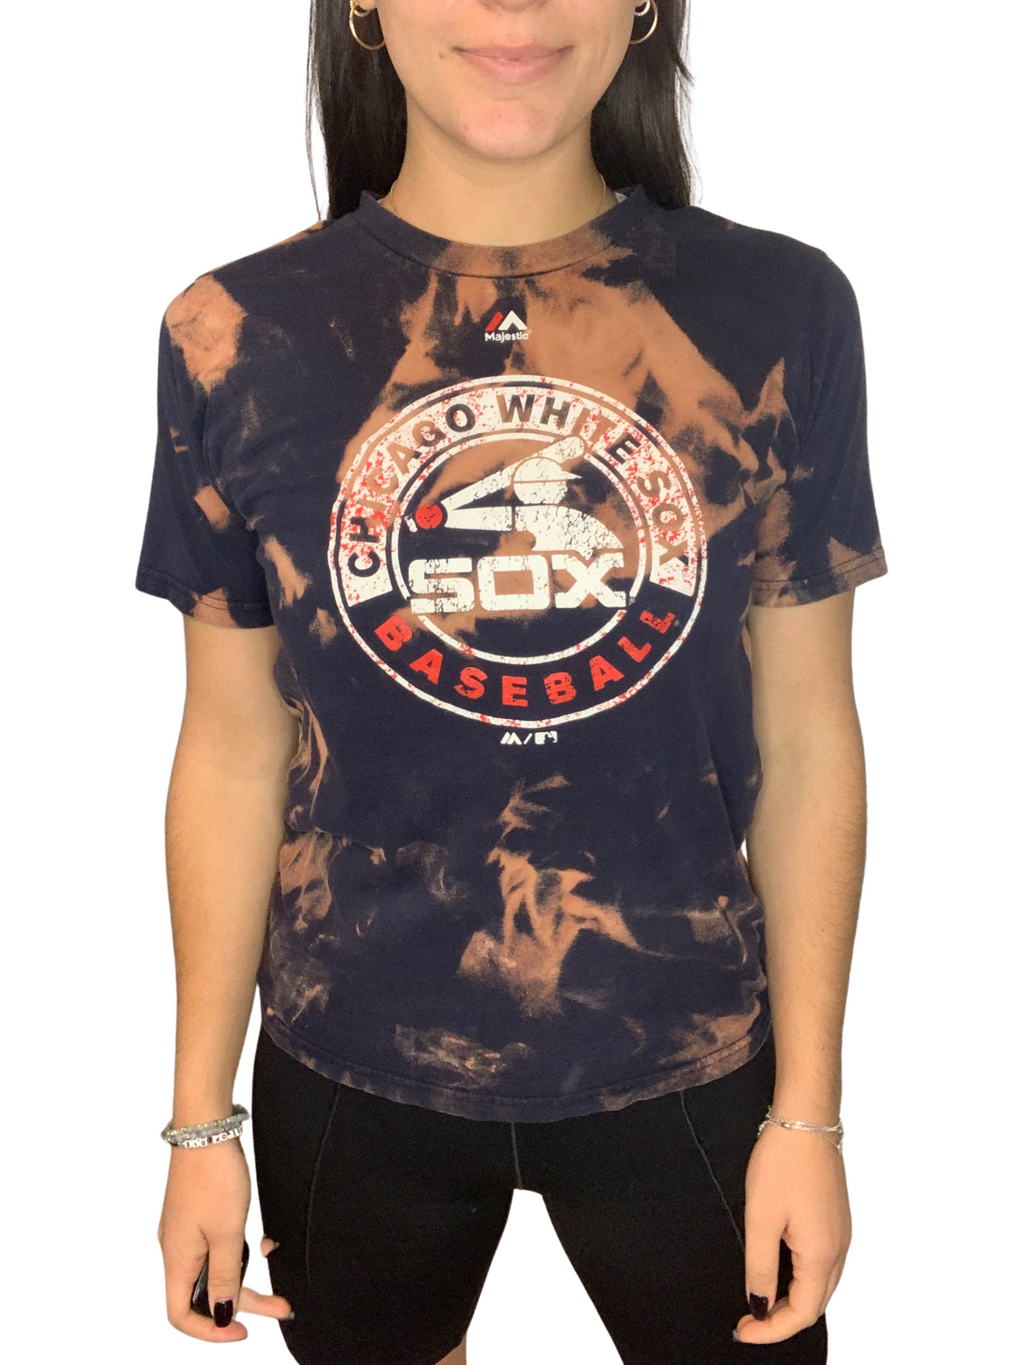 Chicago White Sox Bleached Shirt